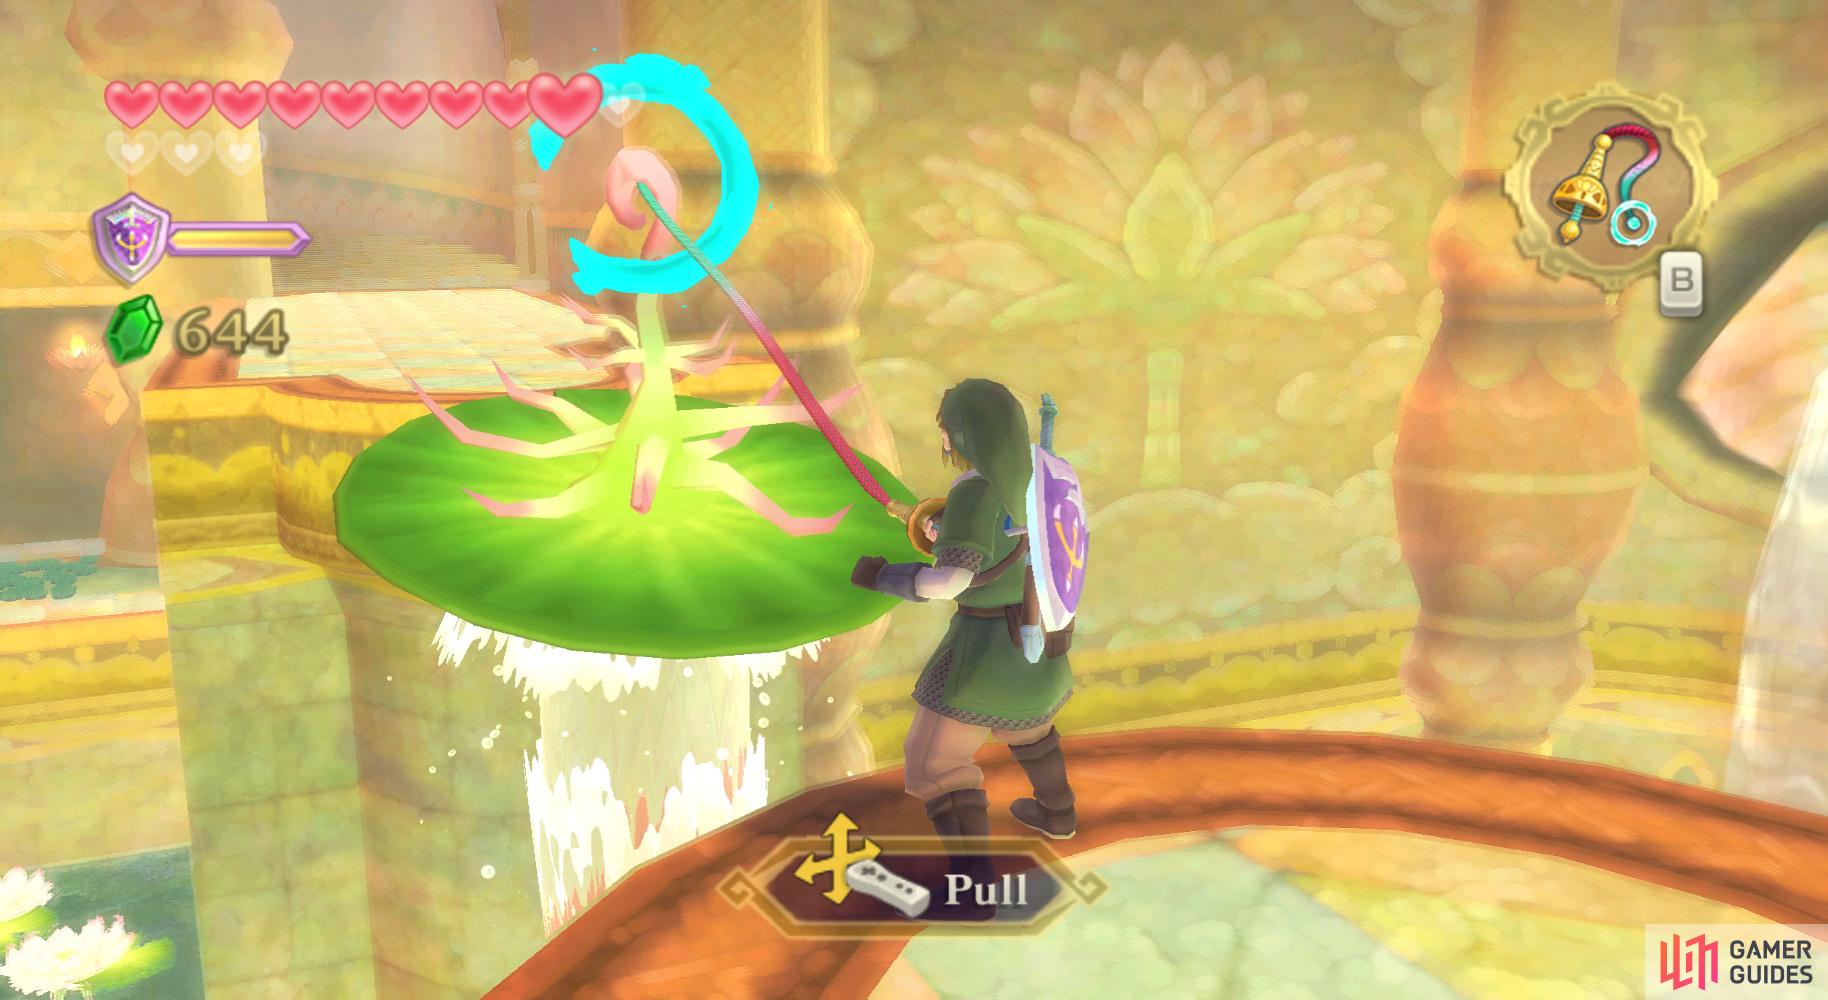 After activating the water valve, go around and flip the same lilypad with your whip, then dash across it.